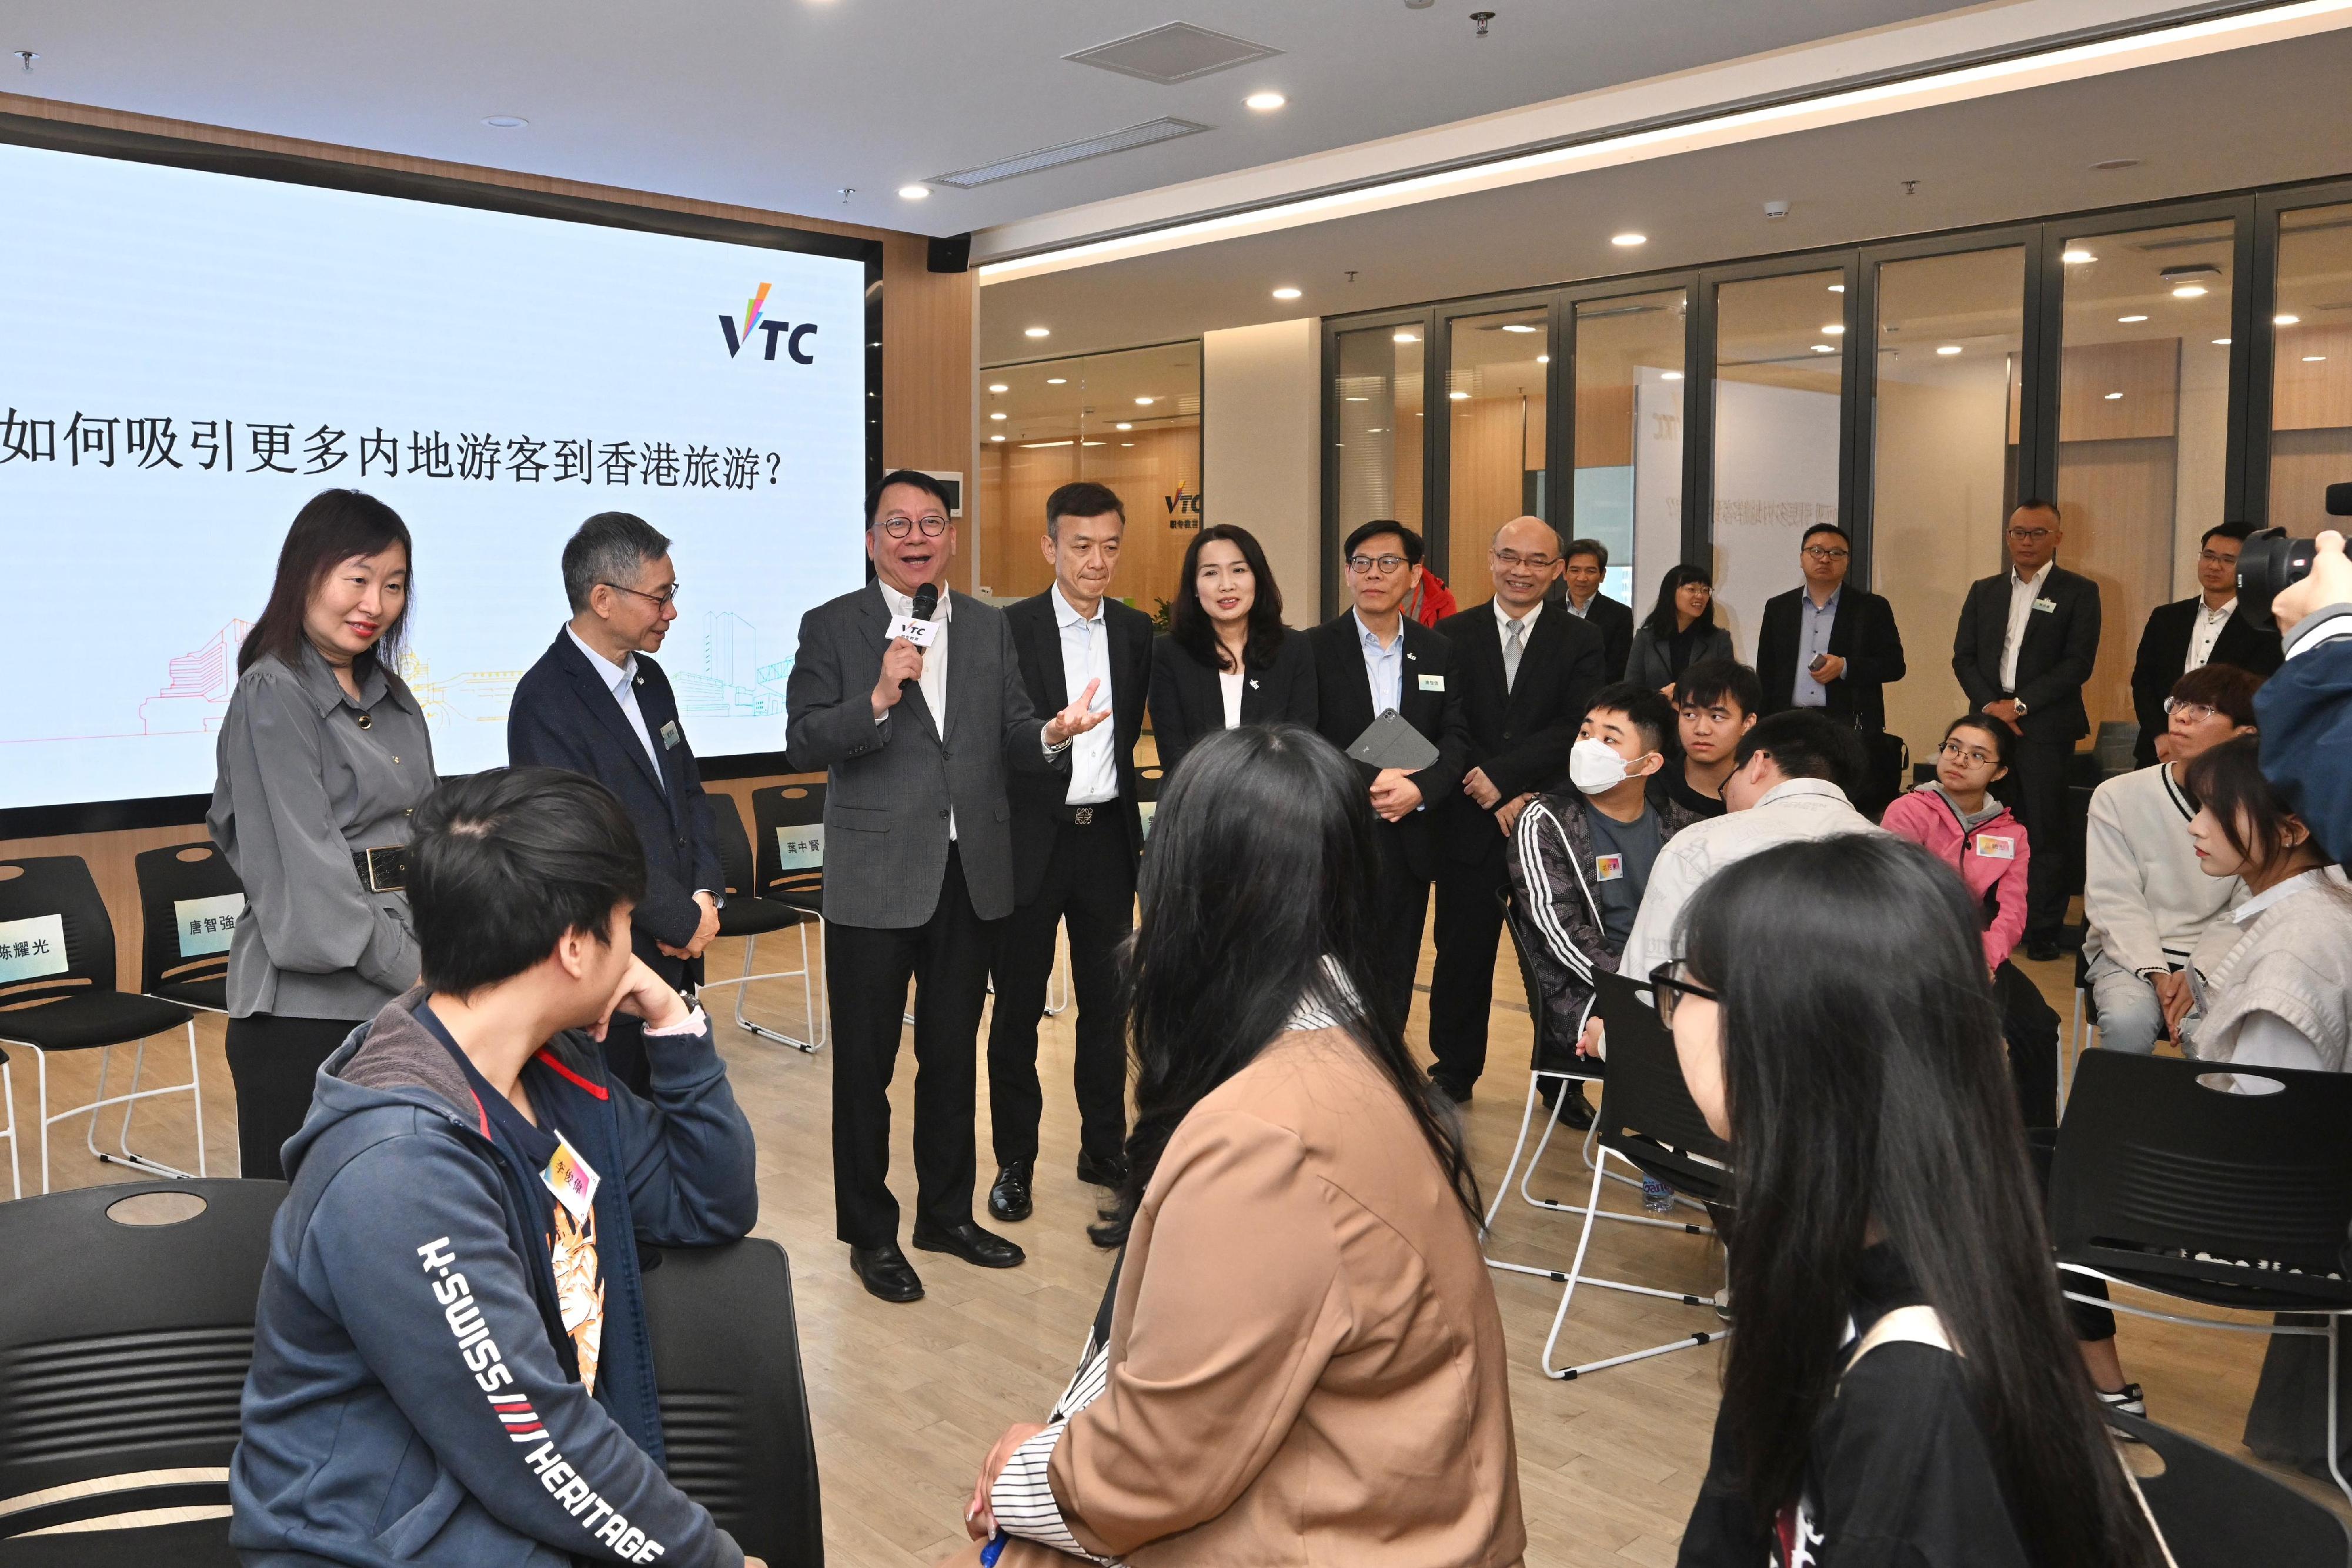 The Chief Secretary for Administration, Mr Chan Kwok-ki, today (January 10) visited Shenzhen and concluded his visit to Mainland cities of the Guangdong-Hong Kong-Macao Greater Bay Area. Photo shows Mr Chan (third left) exchanging views with students of the Hong Kong Vocational Training Council and the Shenzhen Polytechnic University at the Vocational and Professional Education Services (Shenzhen) Company Limited.